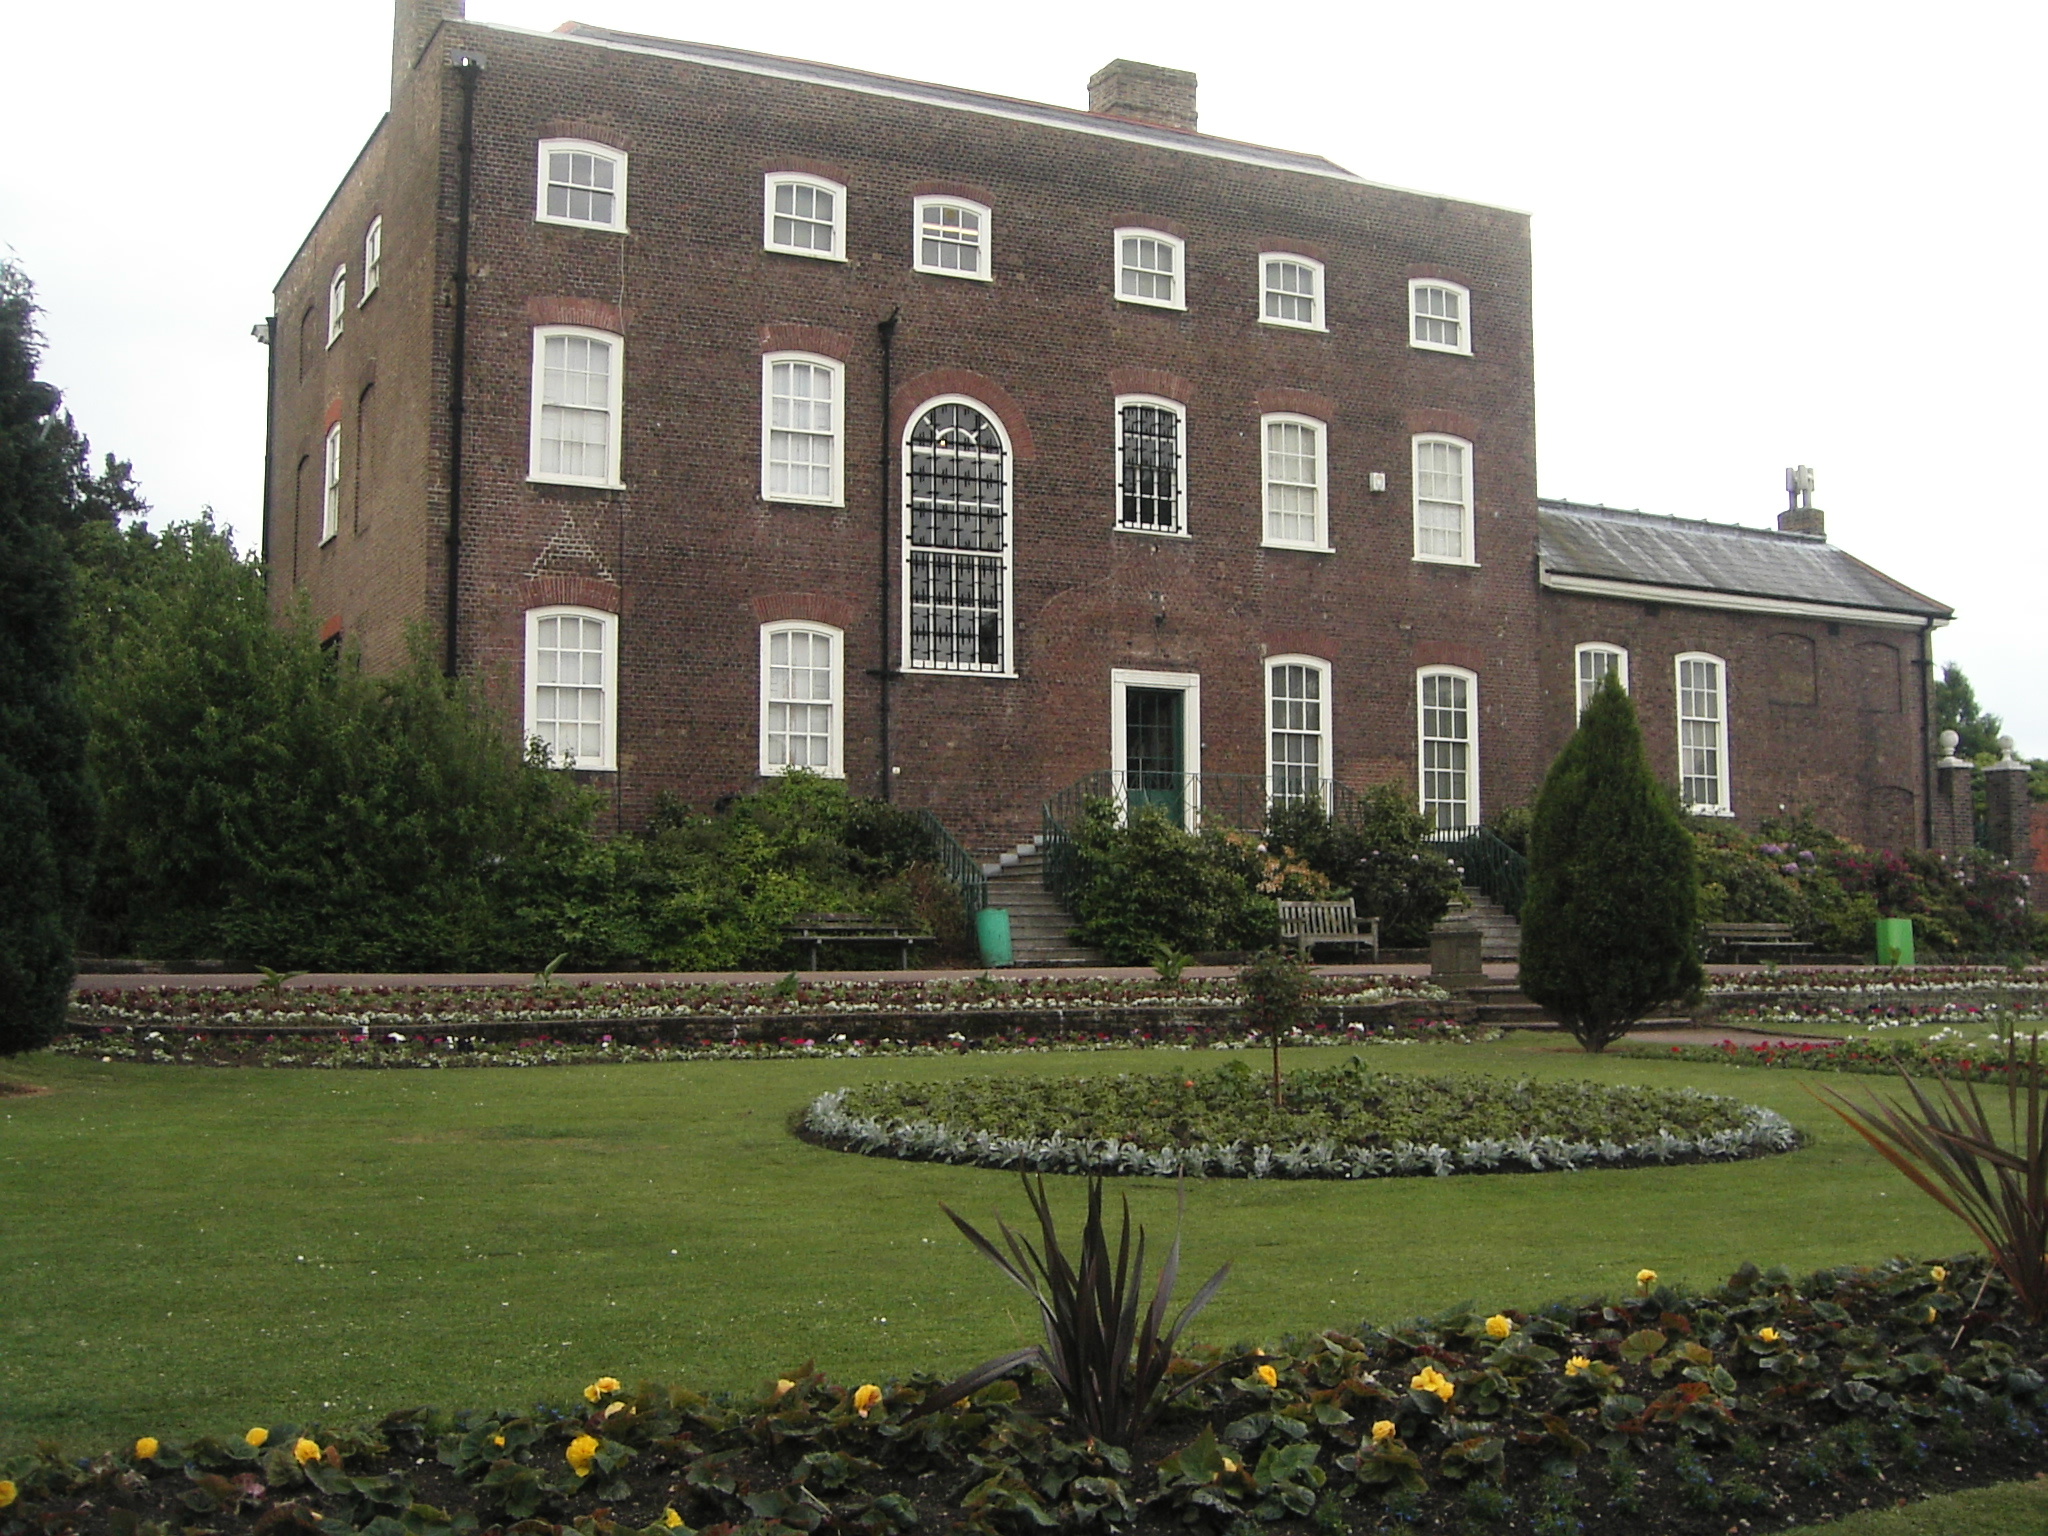 The William Morris Gallery, Walthamstow